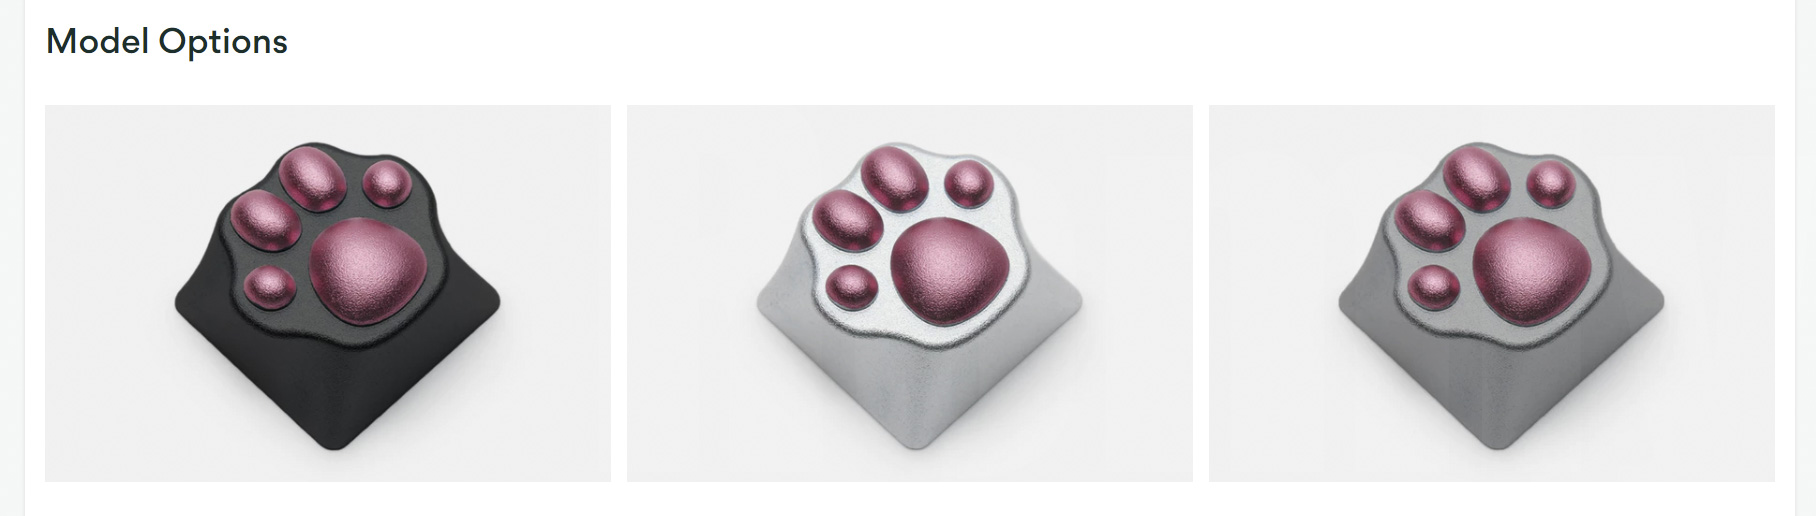 Aluminum Kitty Paw Artisan Keycap Official Color Options